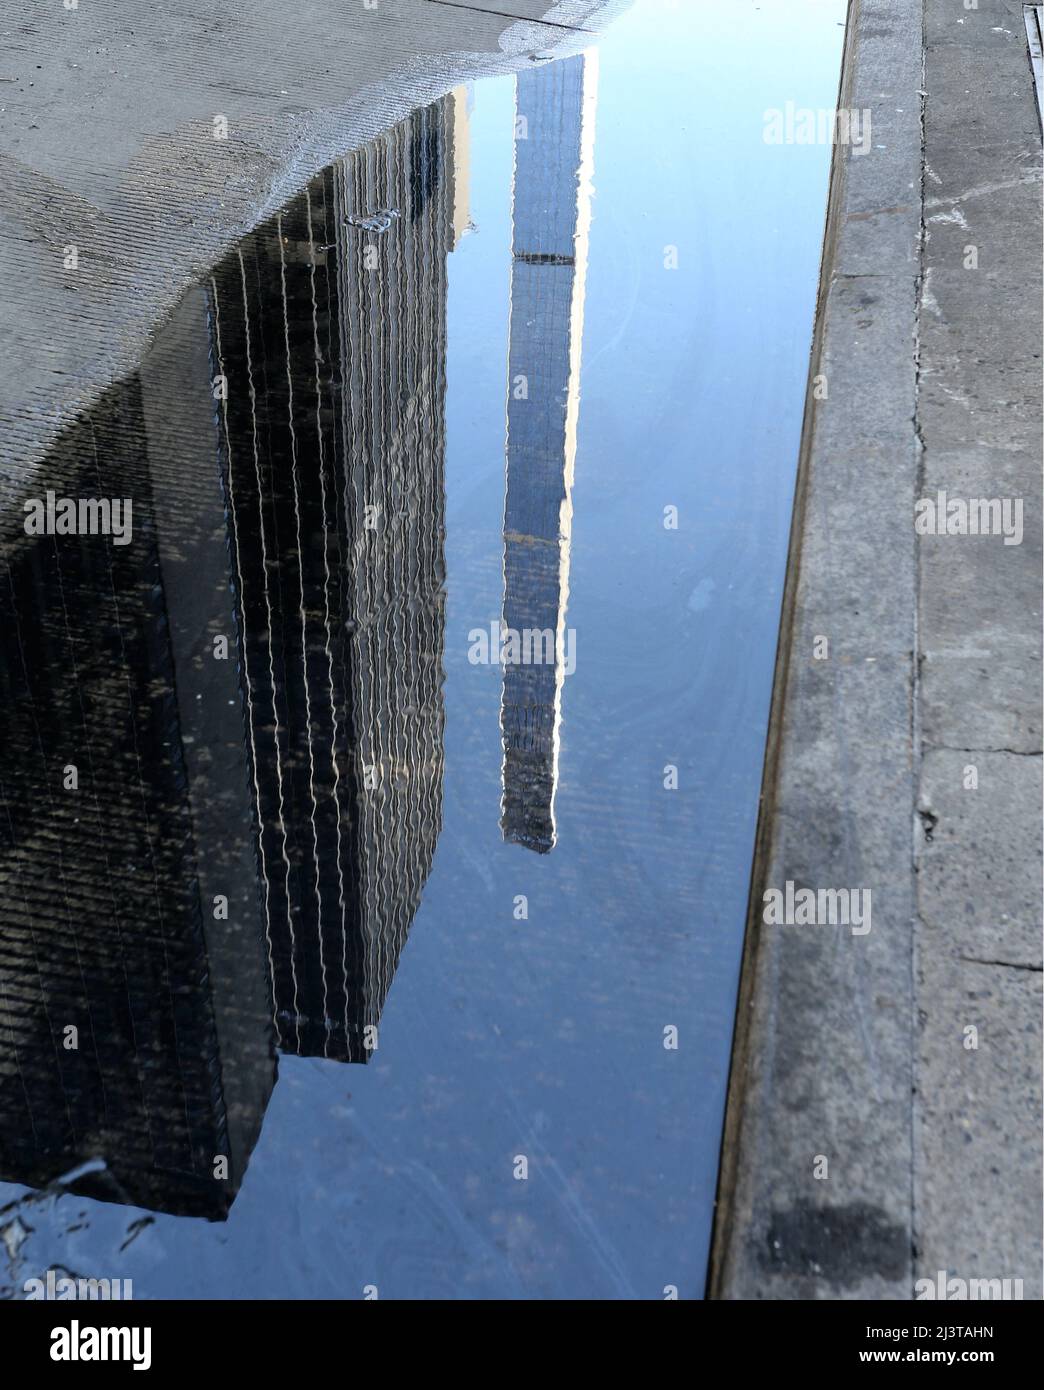 The world's skinniest skyscraper The Steinway Tower is ready for it's first residents in New York City, NY, USA on April 9, 2022. Steinway Tower, or 111 West 57th Street, has a height-to-width ratio of 24:1, making it "the most slender skyscraper in the world," according to the developers. At 1,428 feet, it is also one of the tallest buildings in the Western hemisphere, falling short of two others in New York City: One World Trade Center at 1,776 feet and Central Park Tower at 1,550 feet. The midtown Manhattan development includes 60 apartments spanning the tower's 84 stories and the adjacent Stock Photo